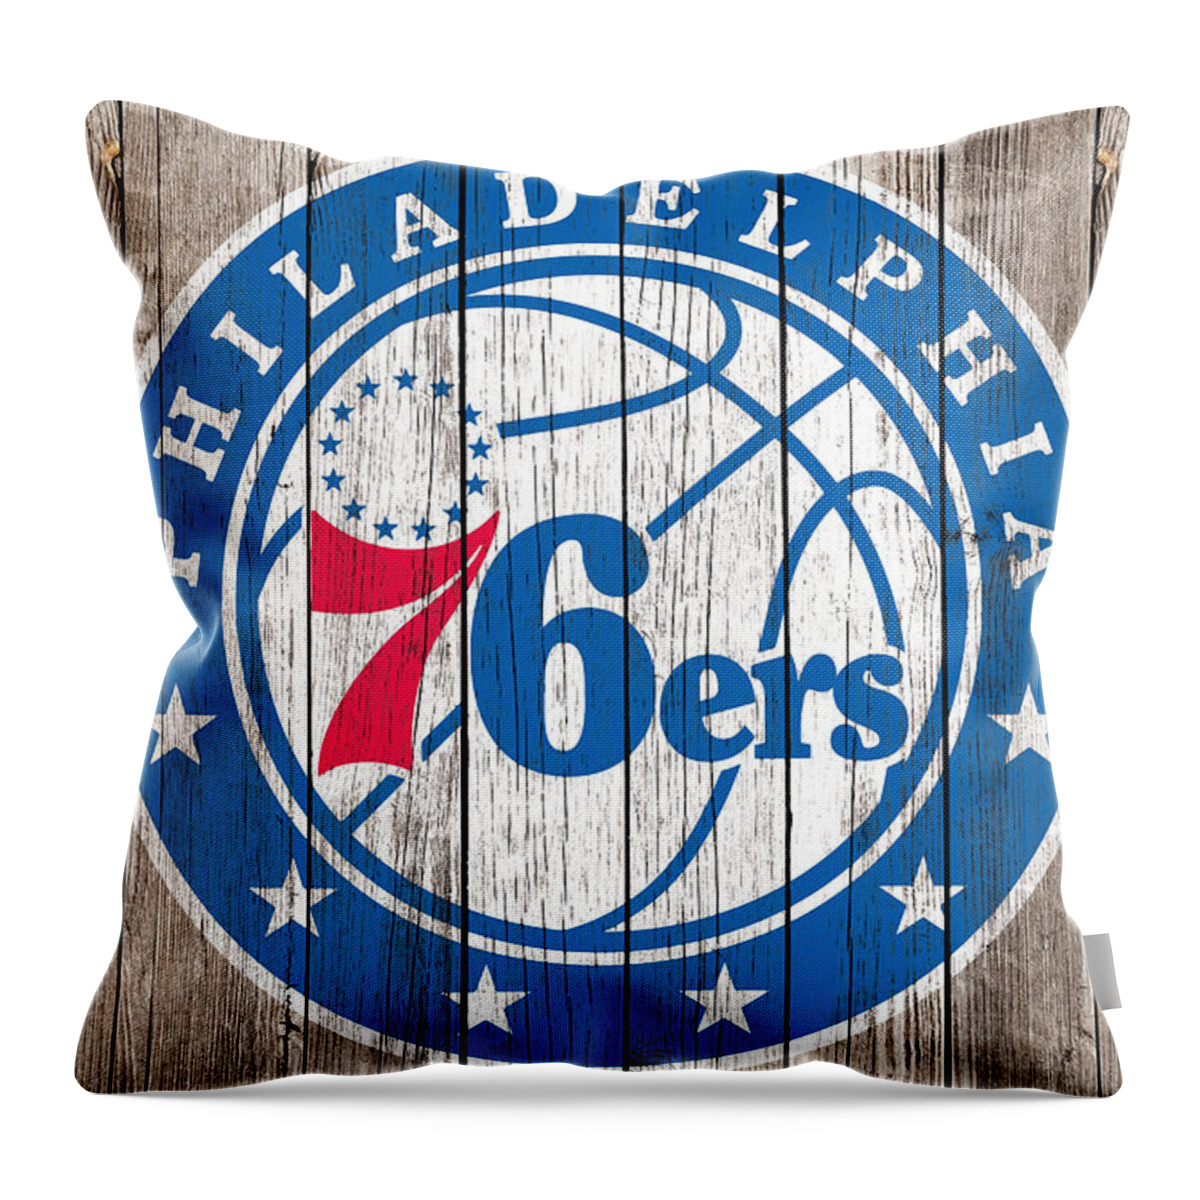 Philadelphia 76ers Throw Pillow featuring the mixed media The Philadelphia 76ers 1b by Brian Reaves